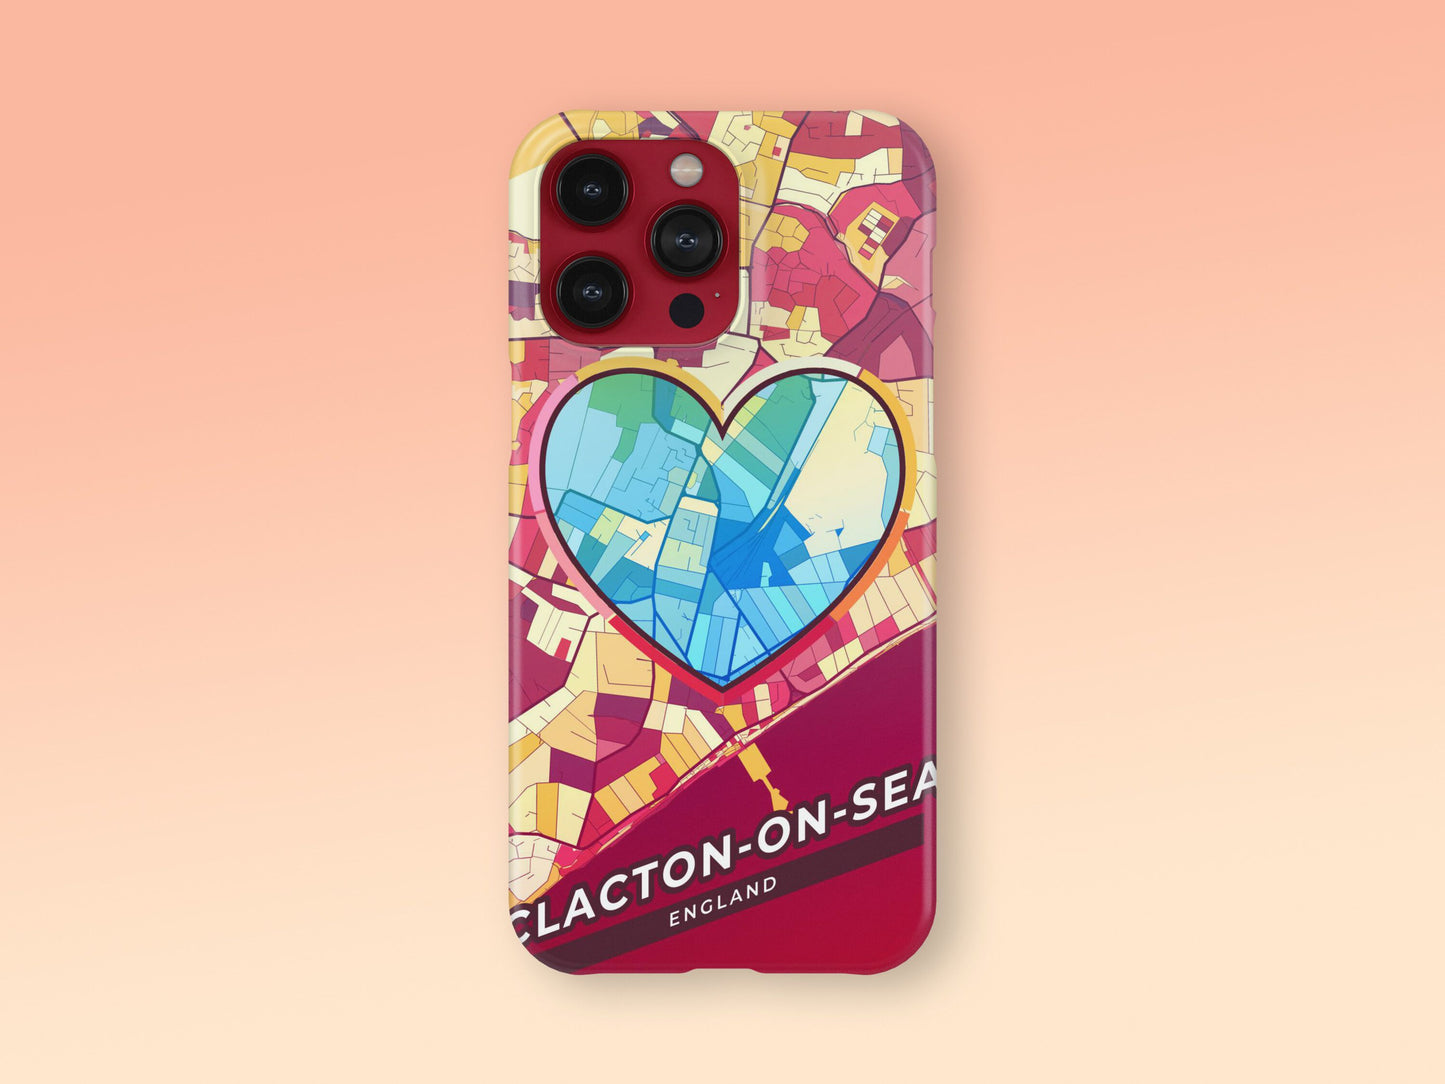 Clacton-On-Sea England slim phone case with colorful icon. Birthday, wedding or housewarming gift. Couple match cases. 2